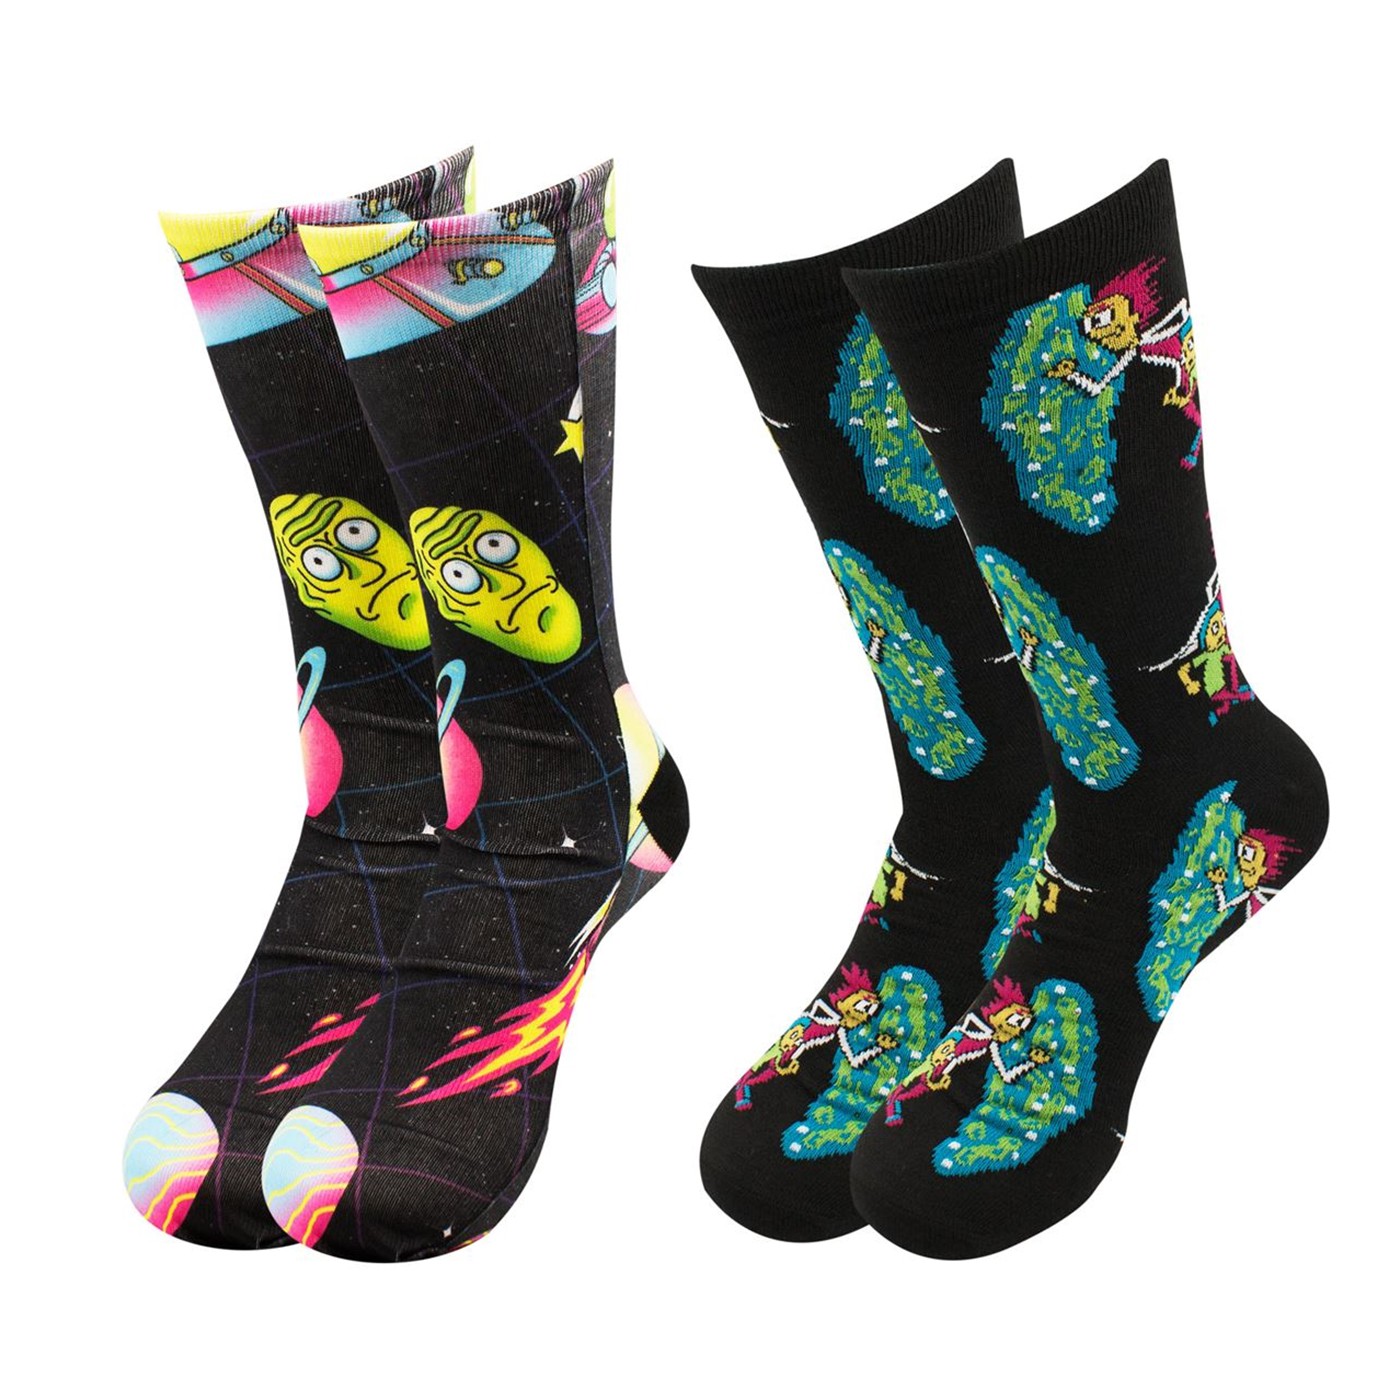 Rick and Morty Sublimated 2-pack Crew Socks